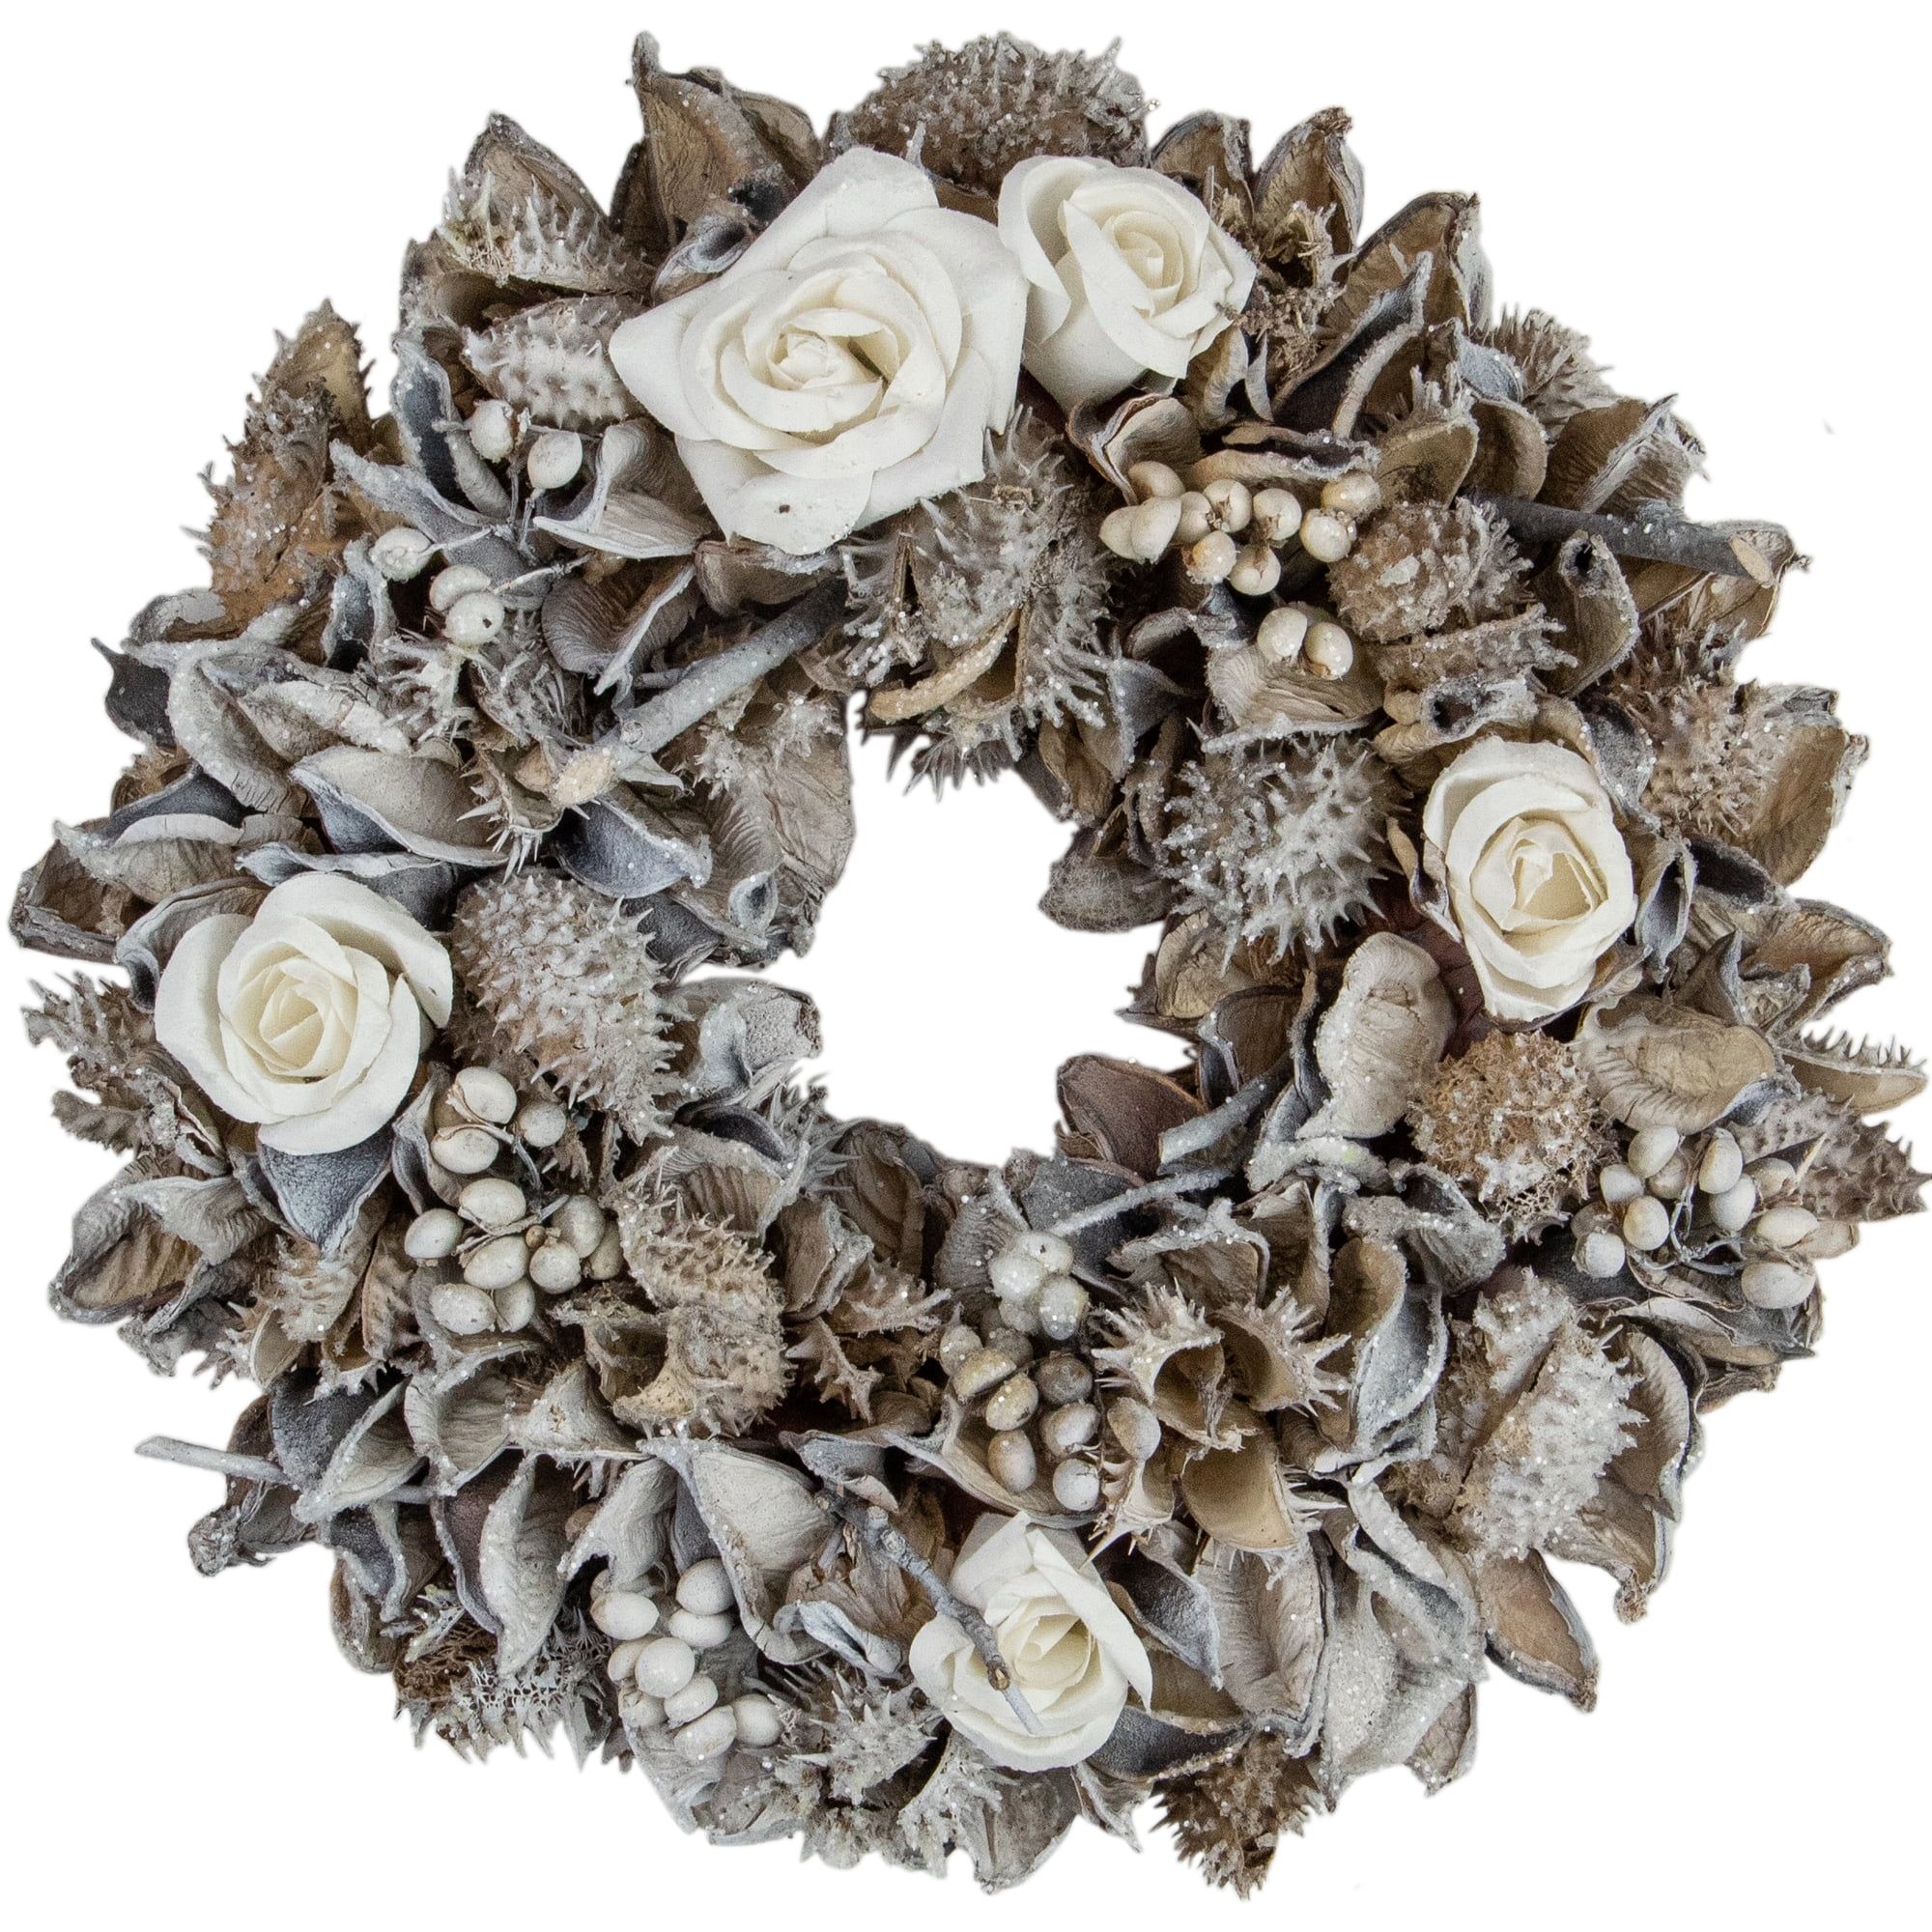 Glittered Rose and Winter Botanicals Artificial Christmas Wreath, 9.5-Inch, Unlit | Walmart (US)